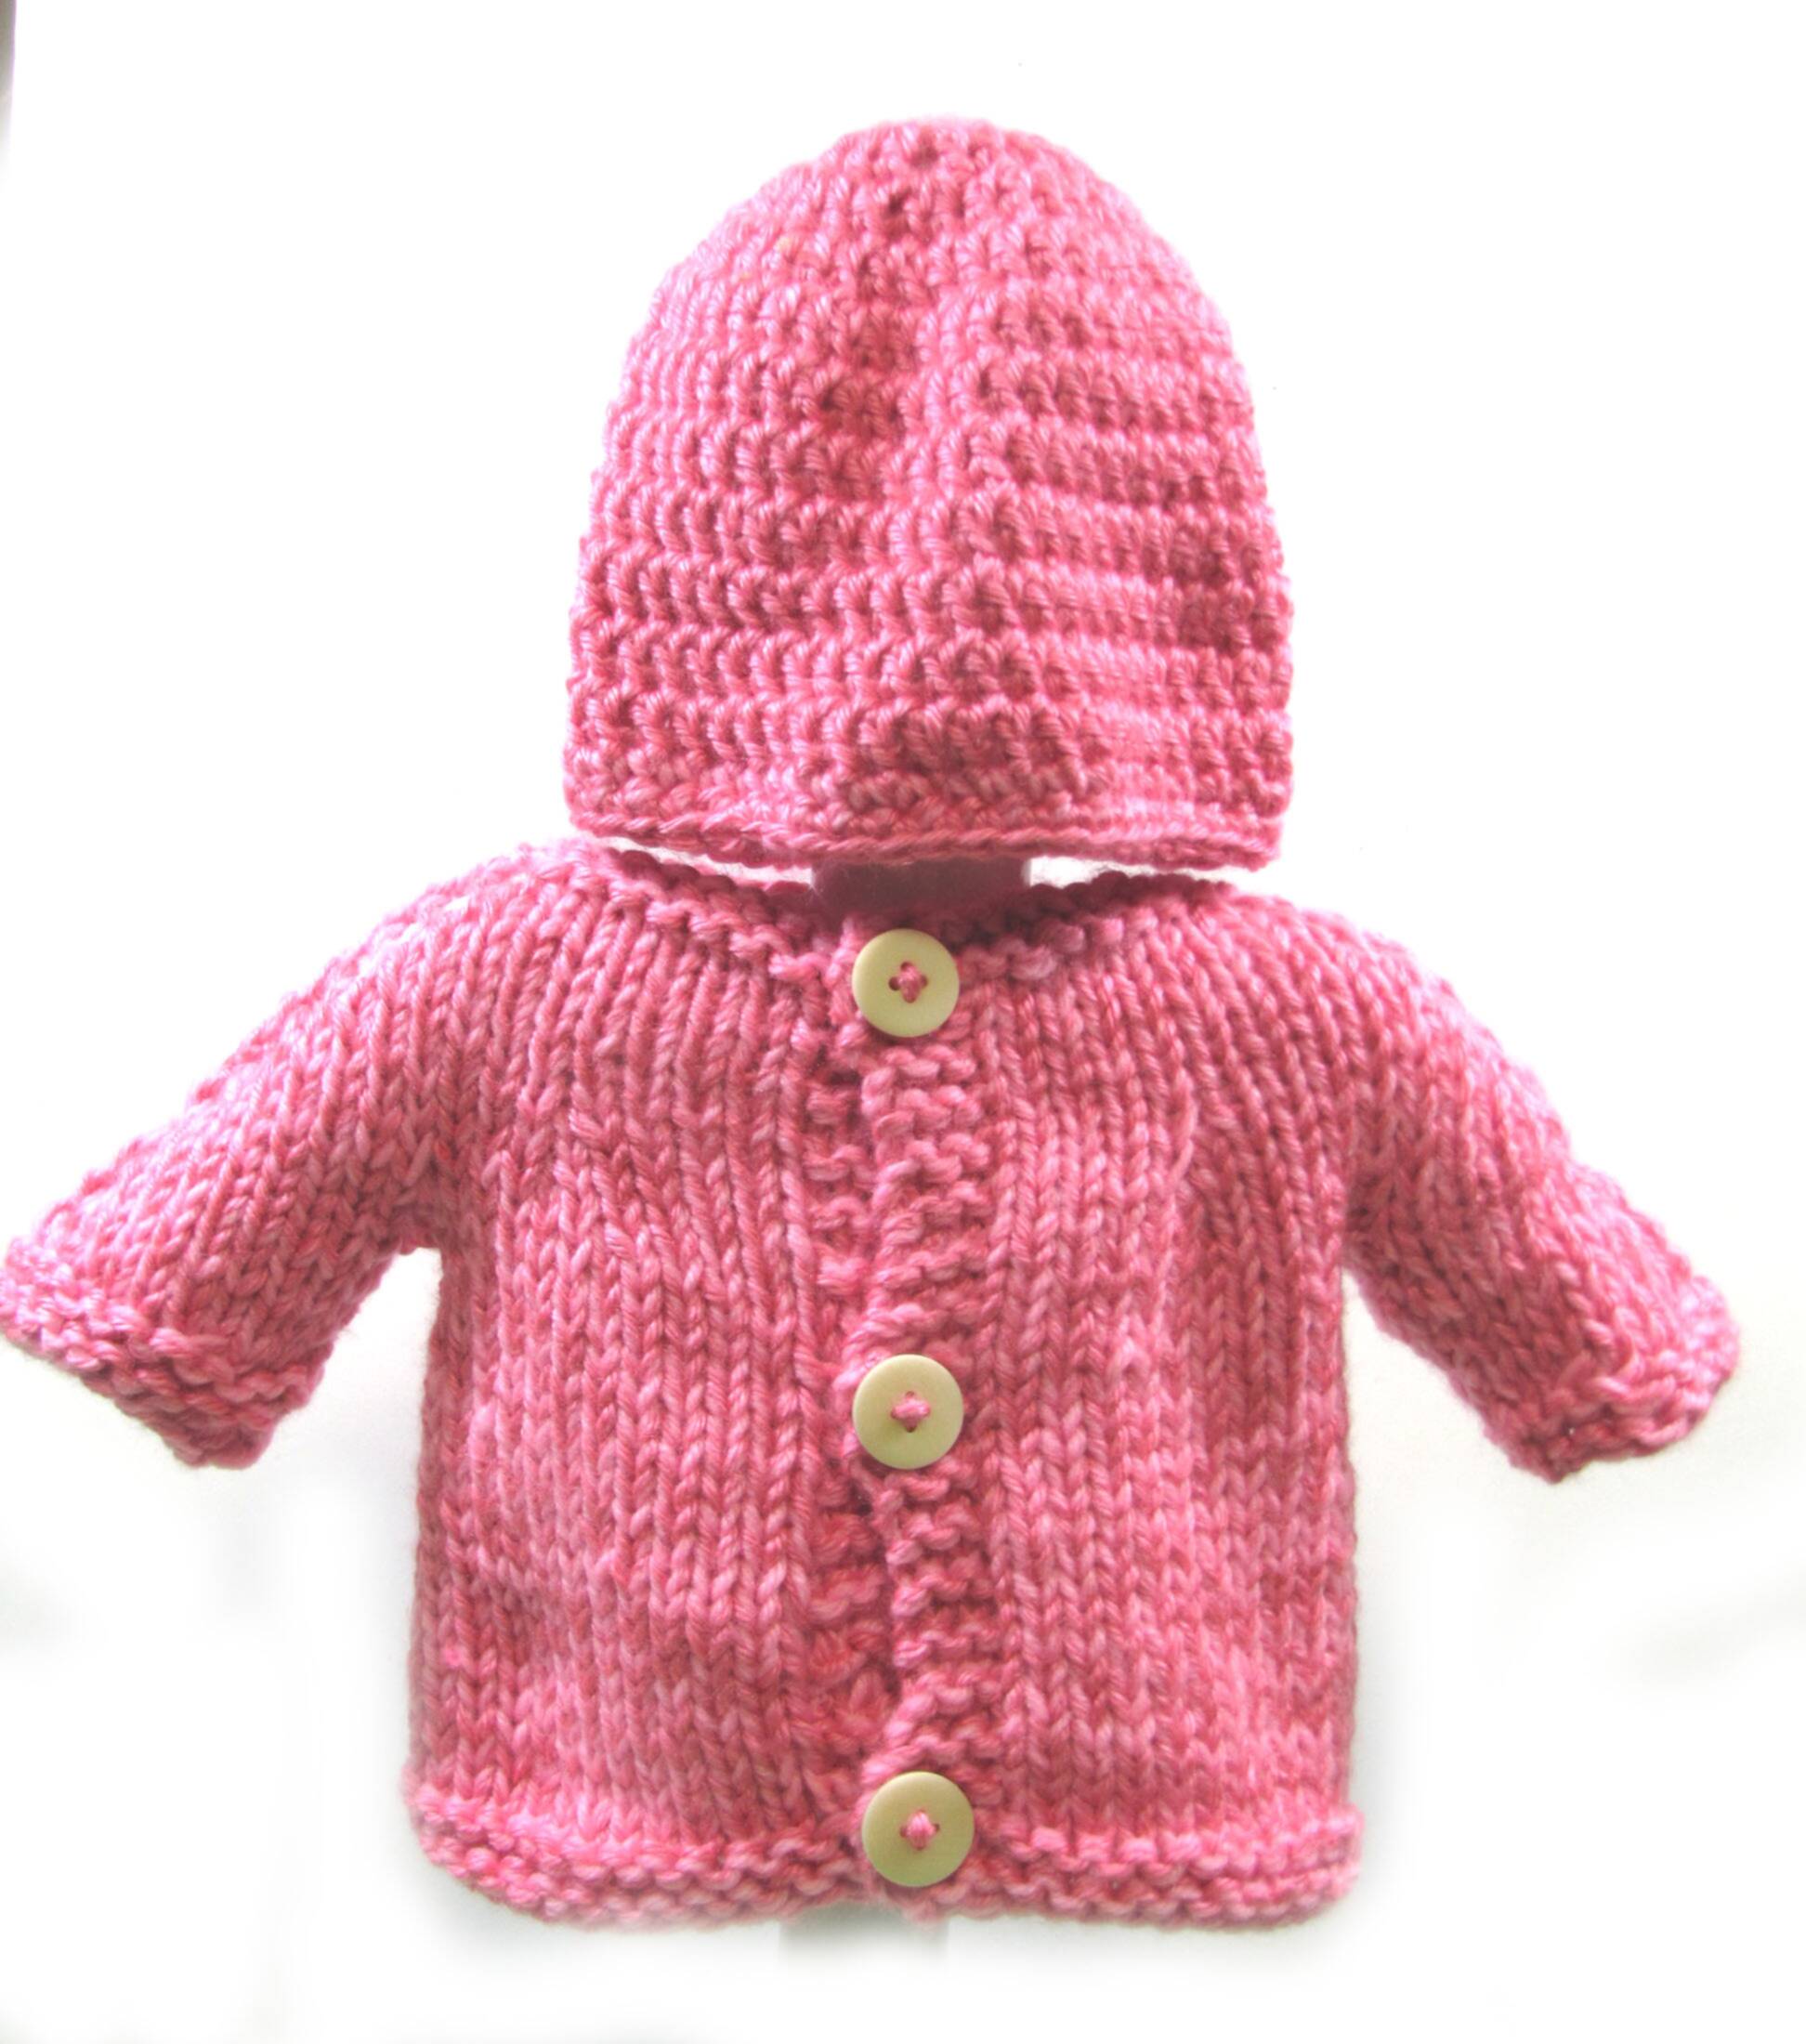 KSS Pink Baby Sweater/Jacket and Cap set (6 Months) SW-972 KSS-SW-972-AZH